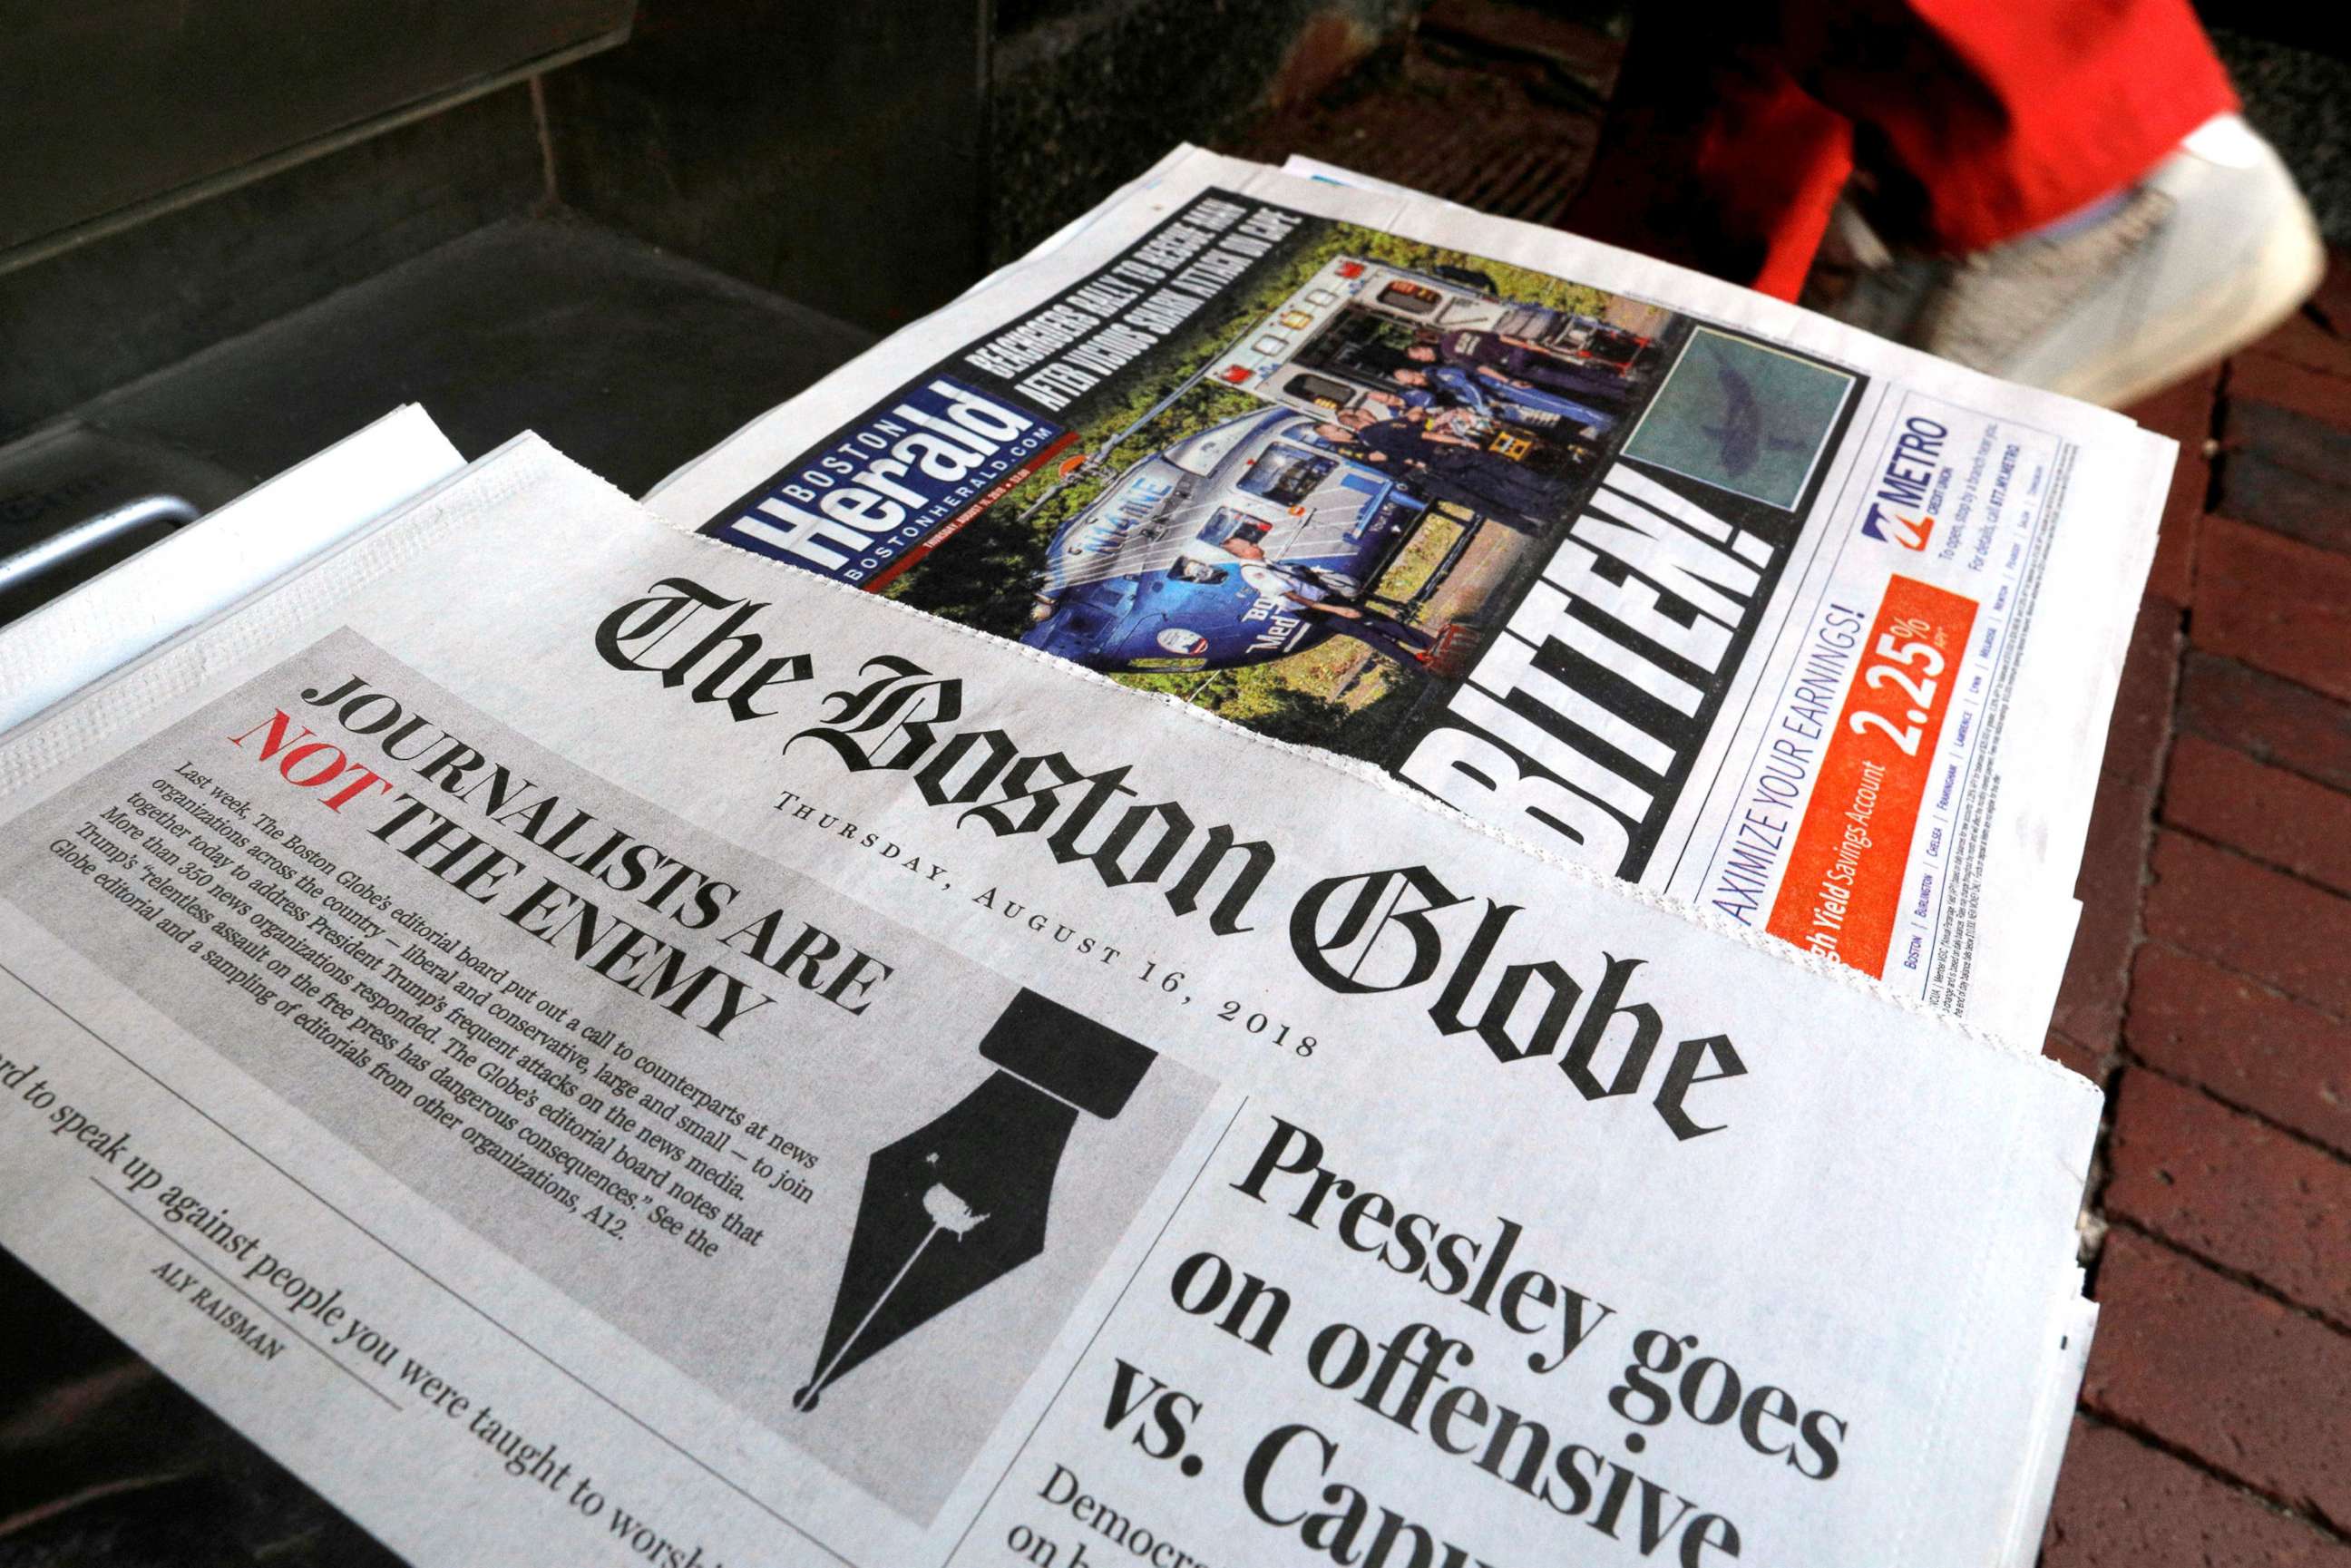 PHOTO: A customer walks past the front page of the Boston Globe newspaper referencing their editorial defense of press freedom at a newsstand in Cambridge, Aug. 16, 2018. 